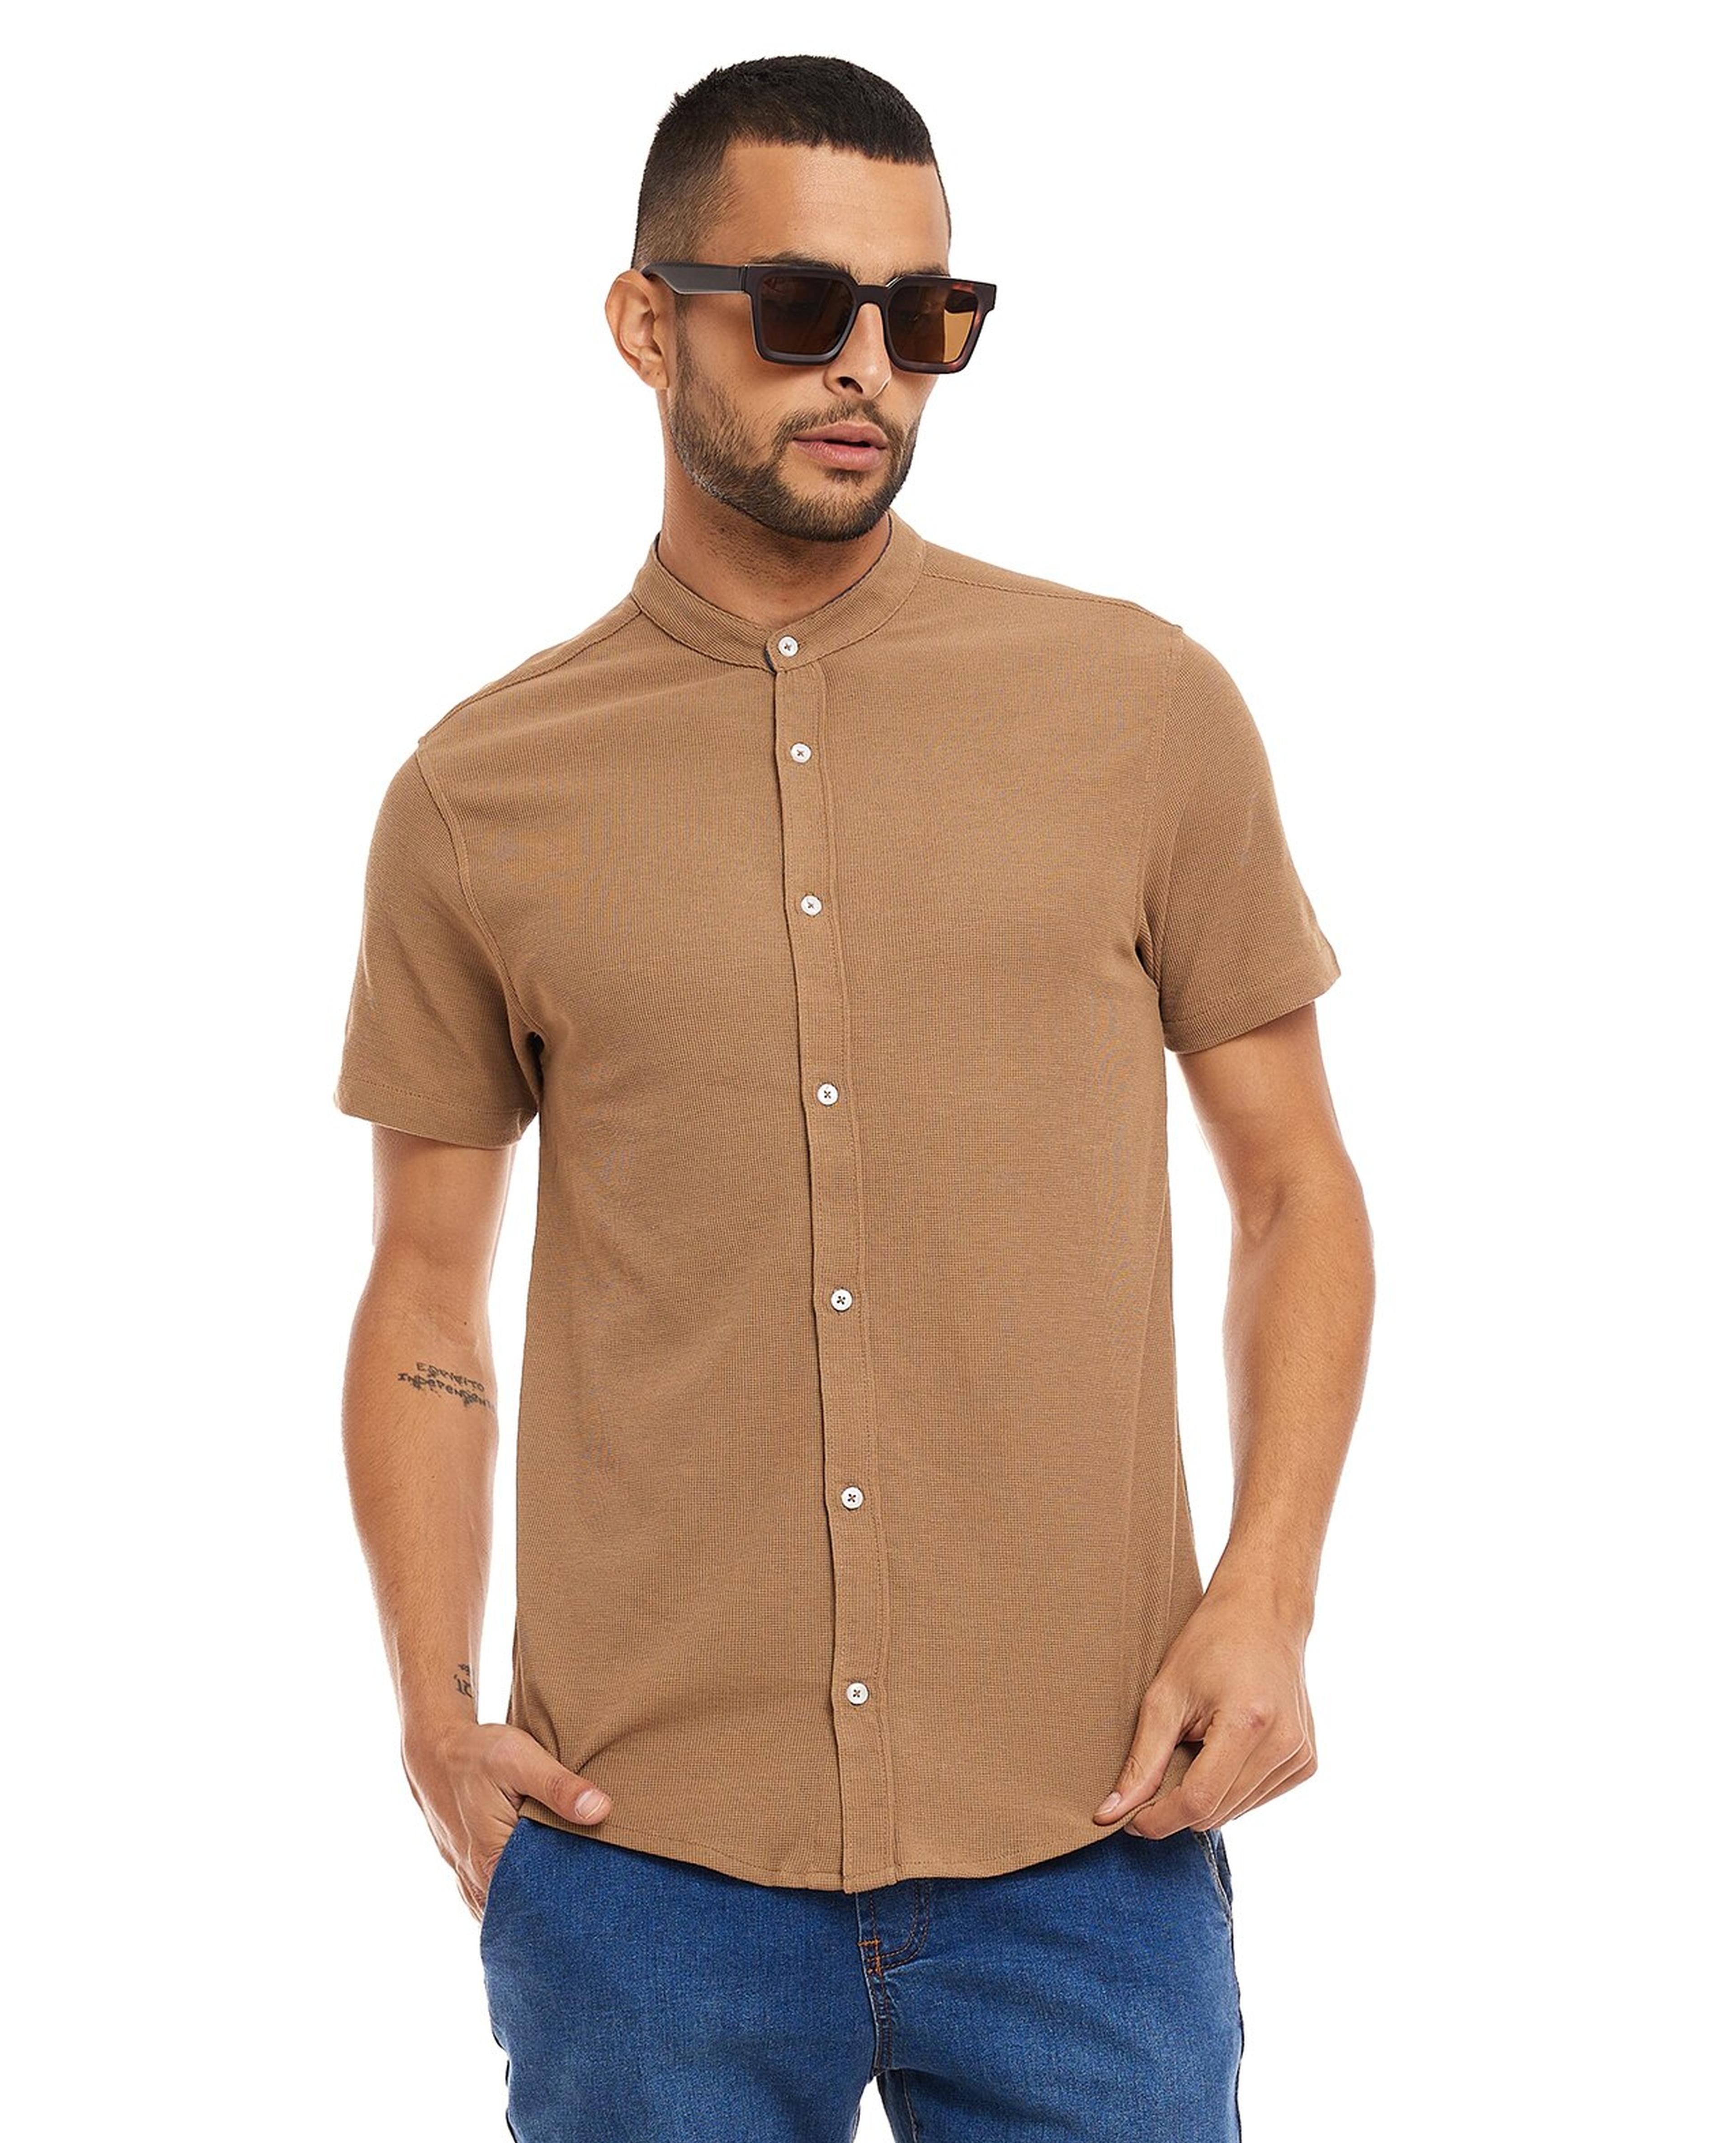 Solid Knitted Shirt with Mandarin Collar and Short Sleeves